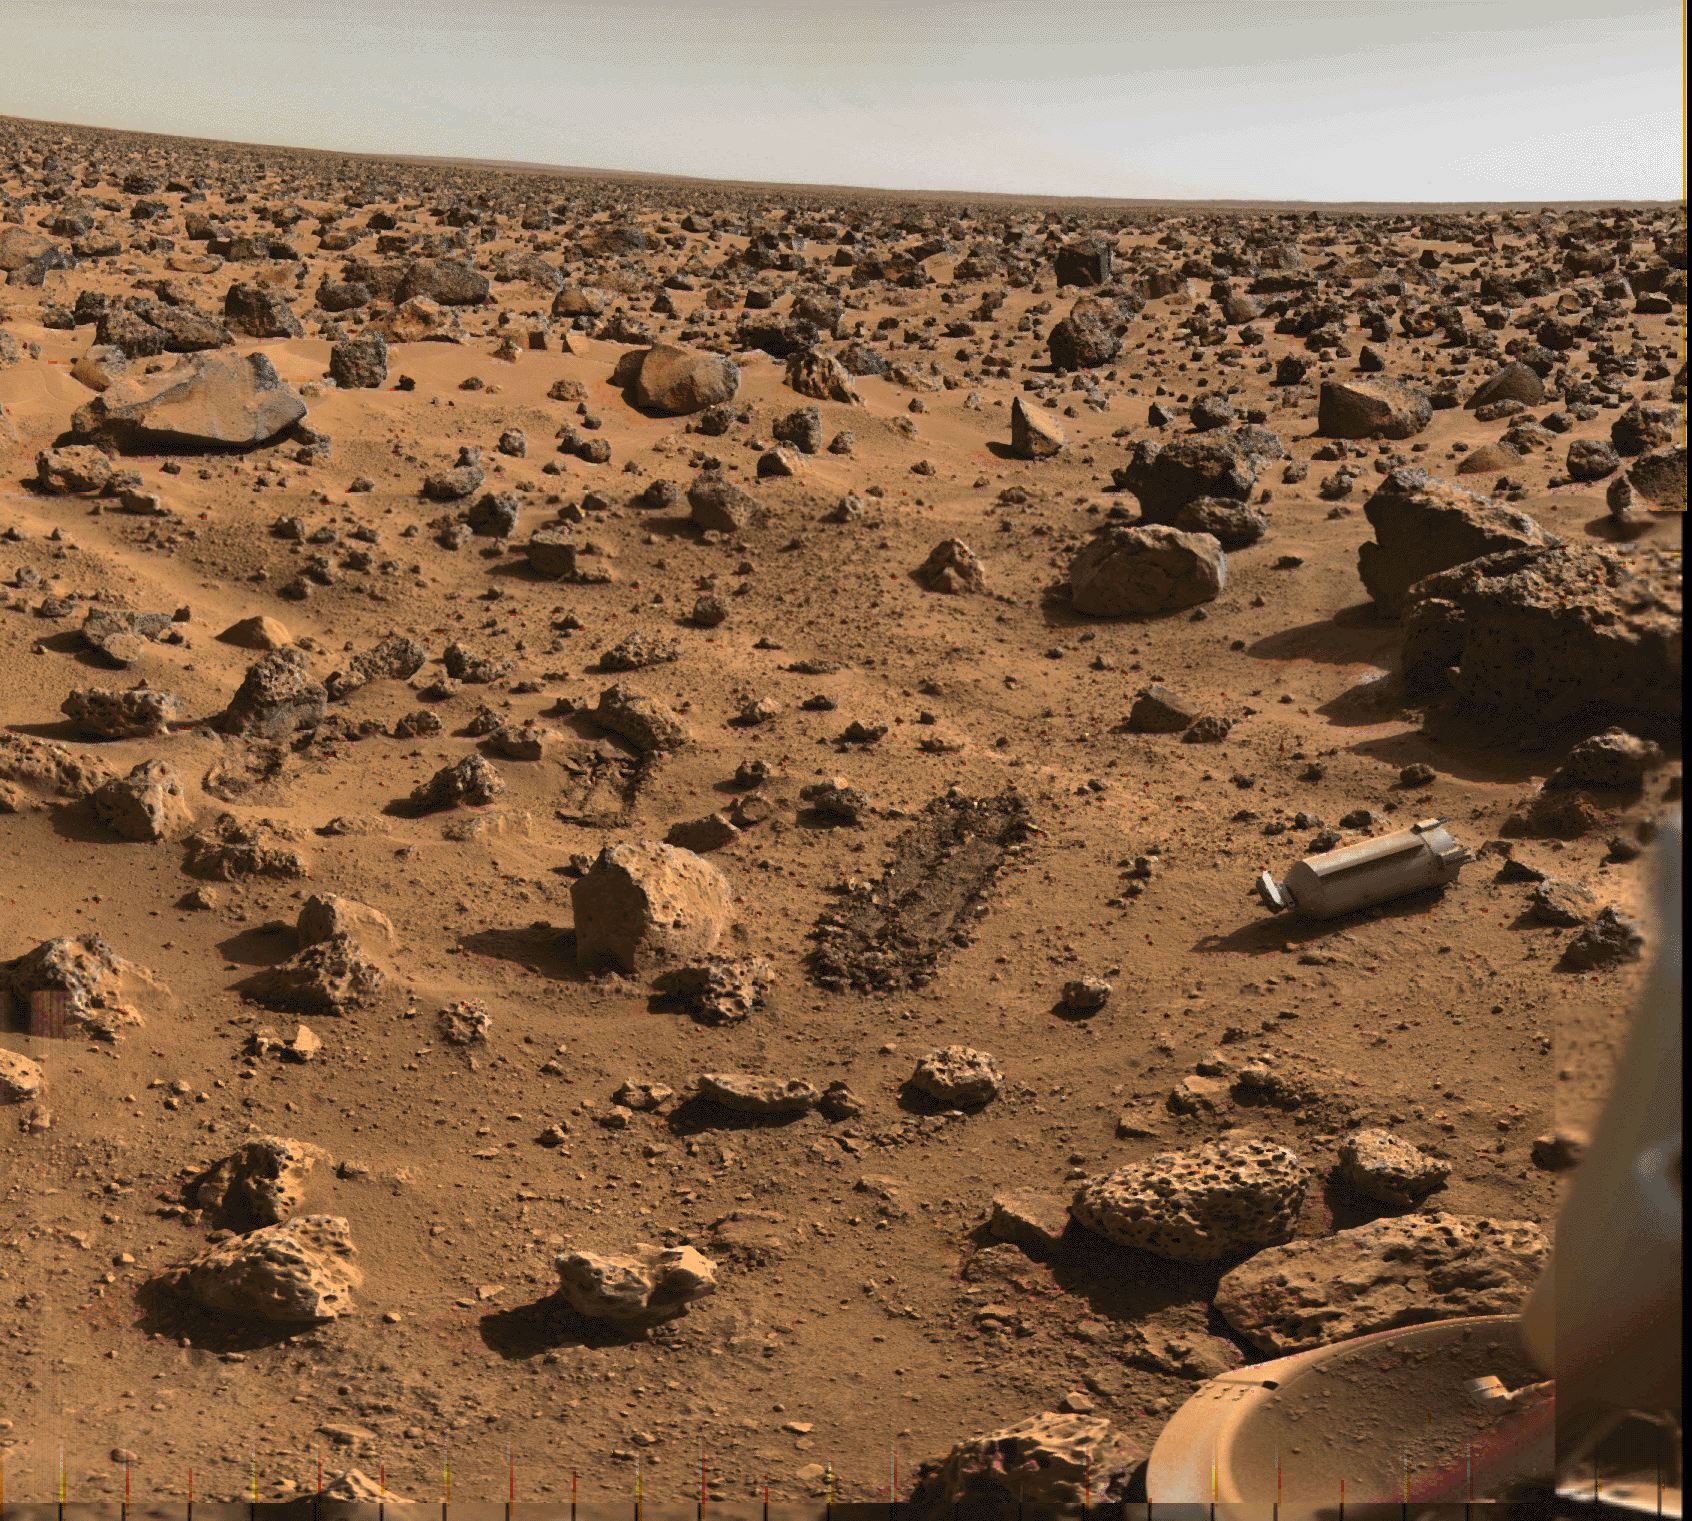 Mars Surface Pictures